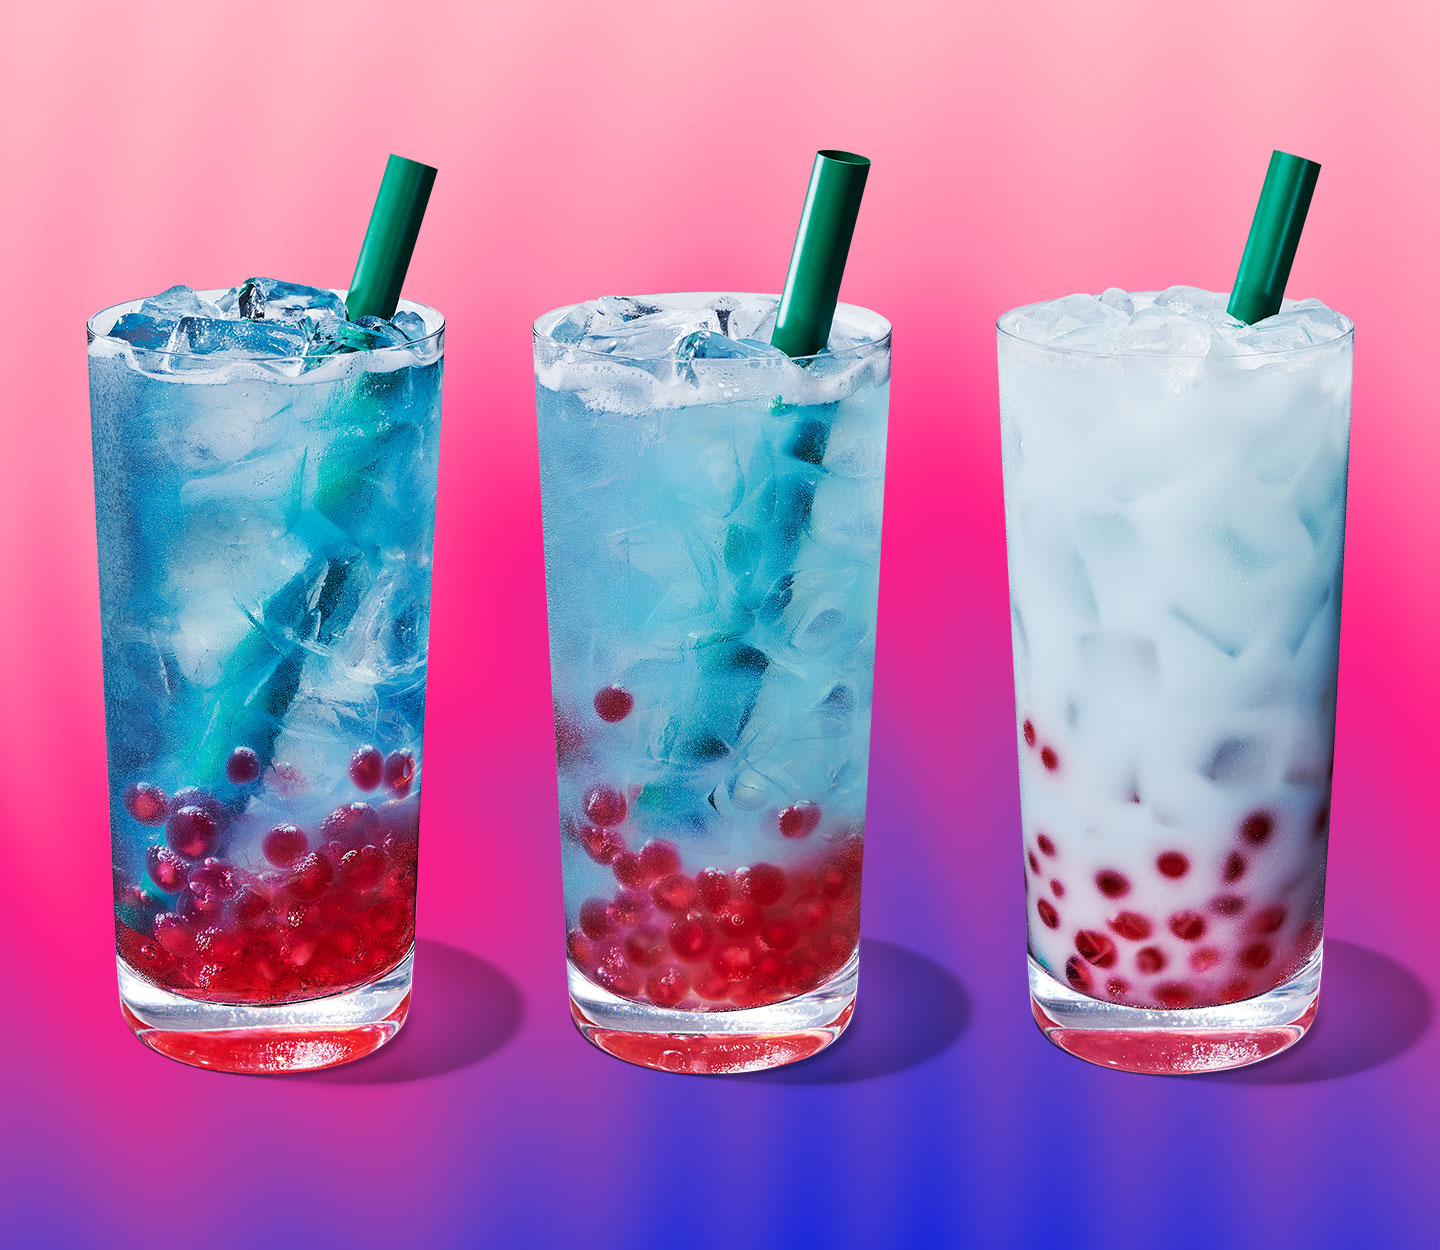 Three blue cold drinks with red pearls at the bottom. The shade of blue progresses from dark to creamy, one drink to the next.